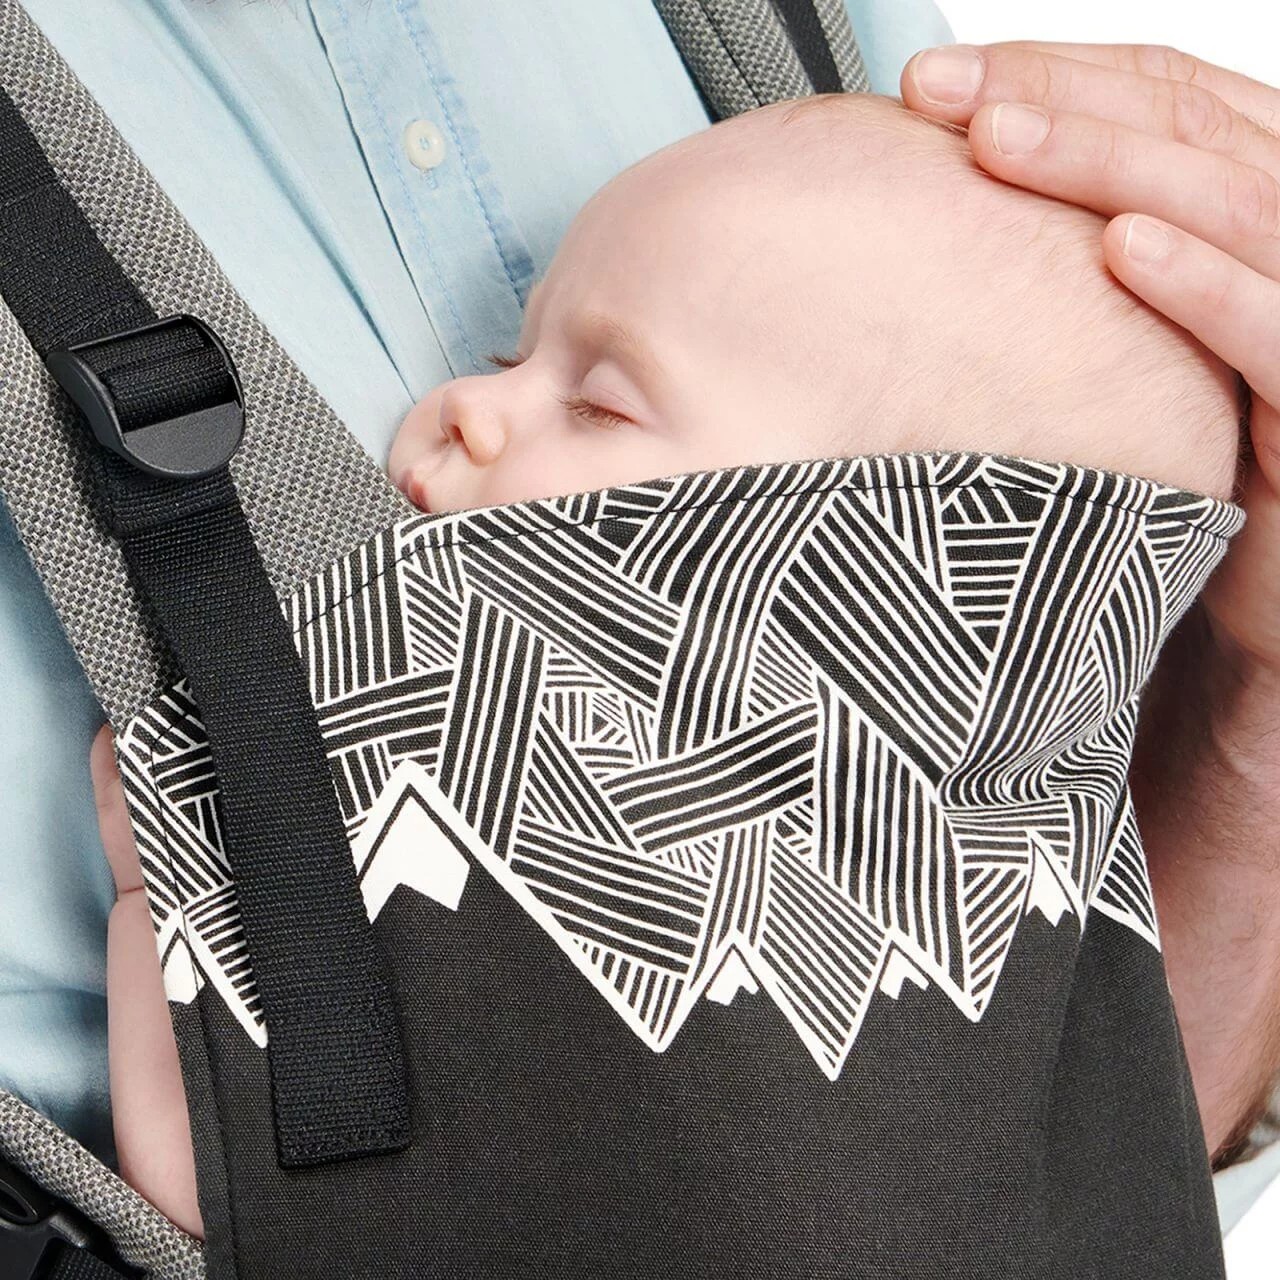 Support for your baby's delicate head